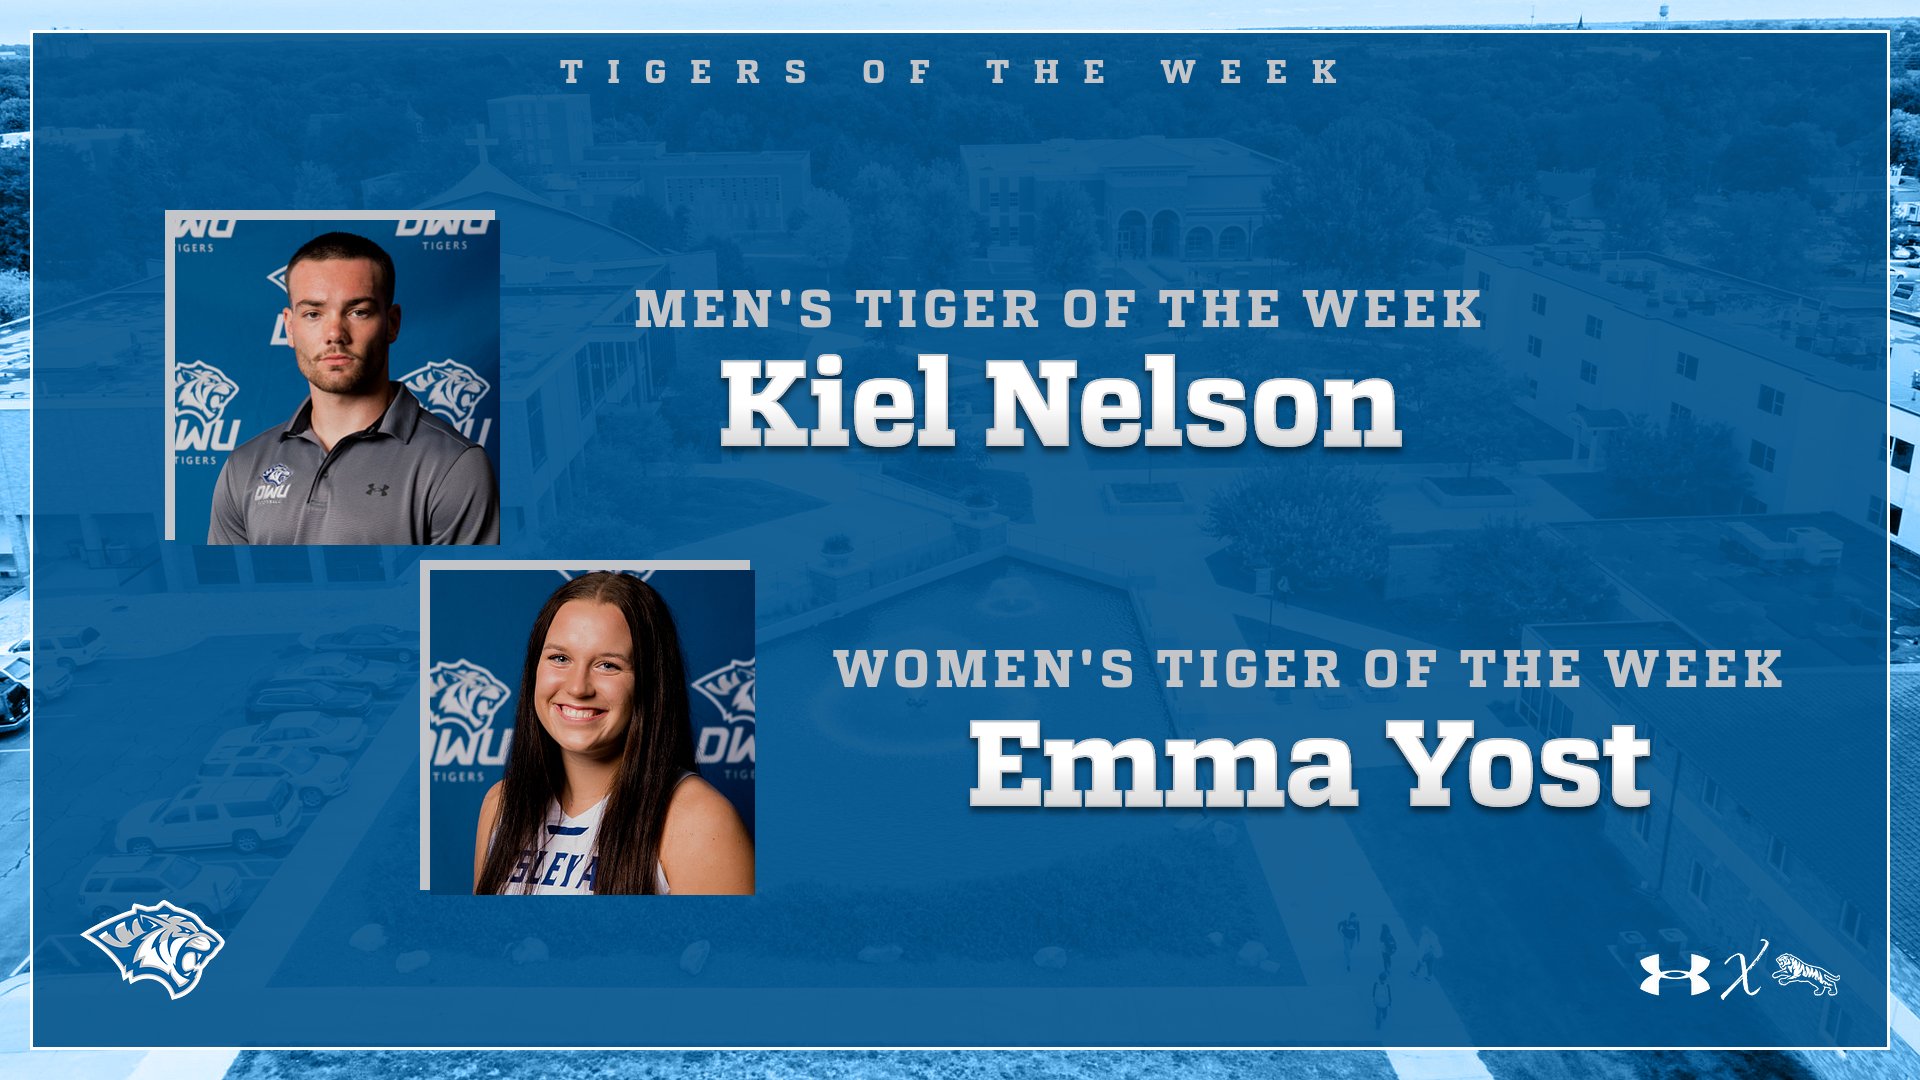 NELSON AND YOST NAMED TIGERS OF THE WEEK